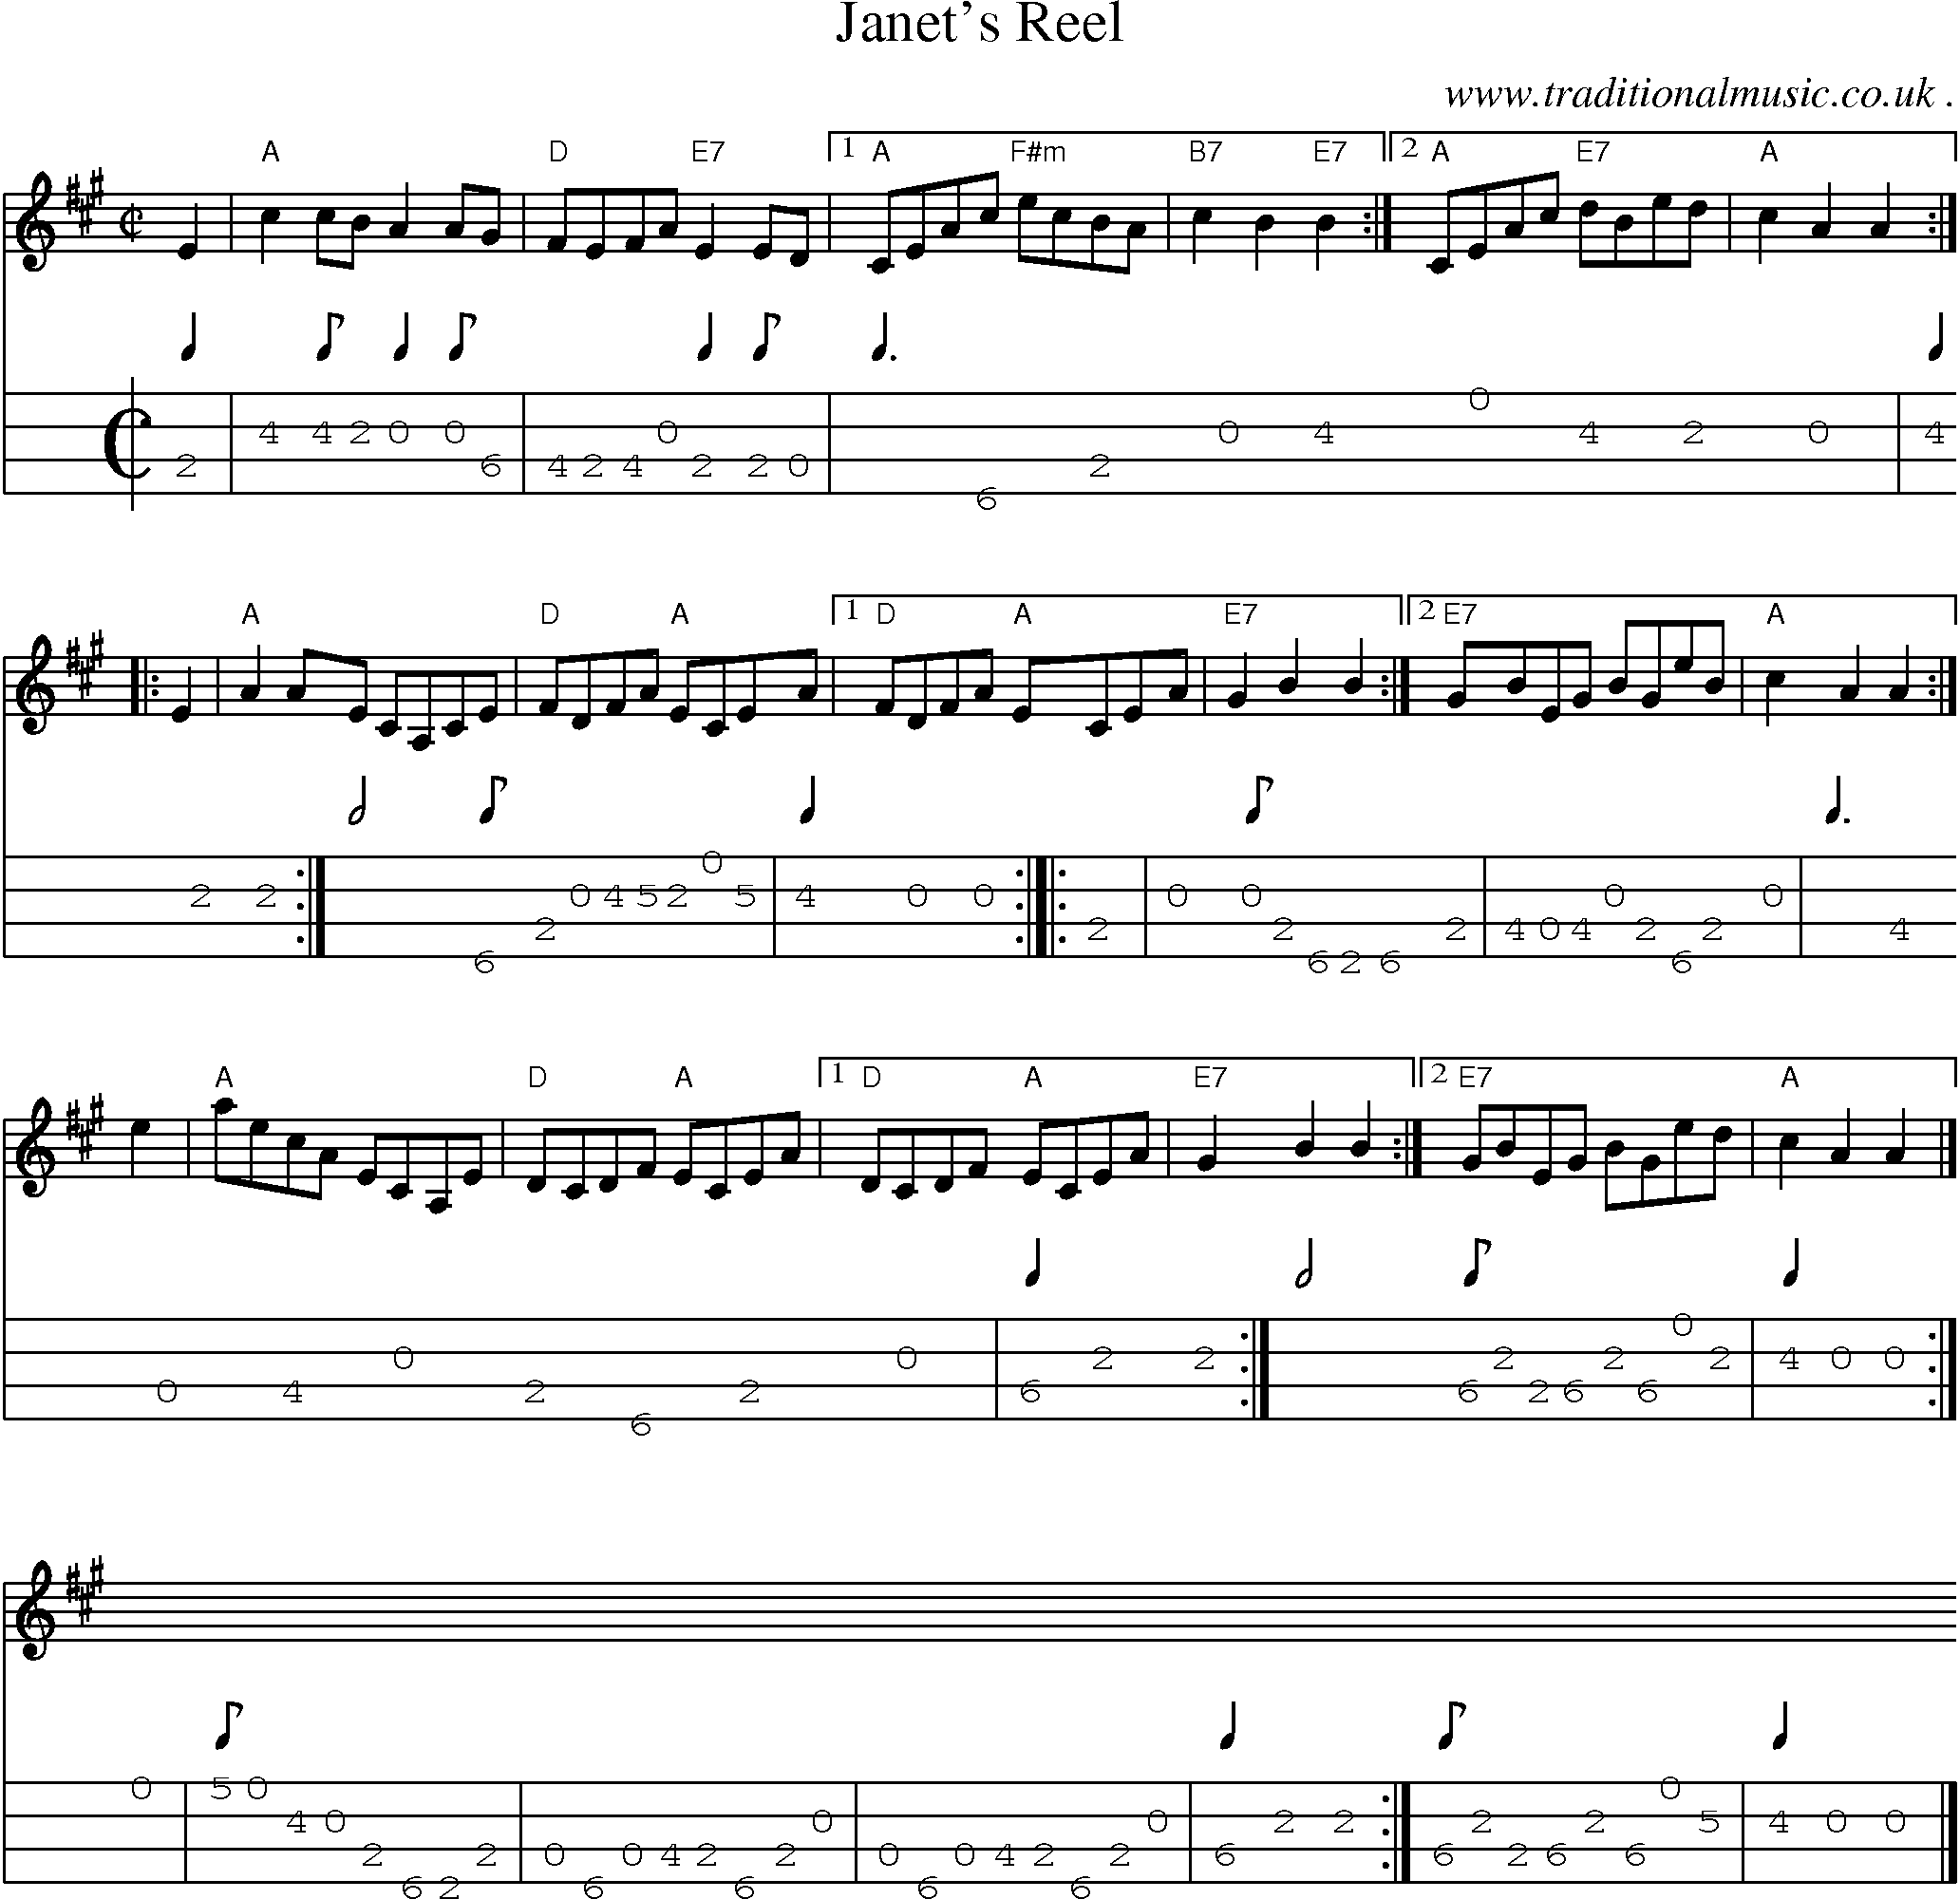 Sheet-music  score, Chords and Mandolin Tabs for Janets Reel